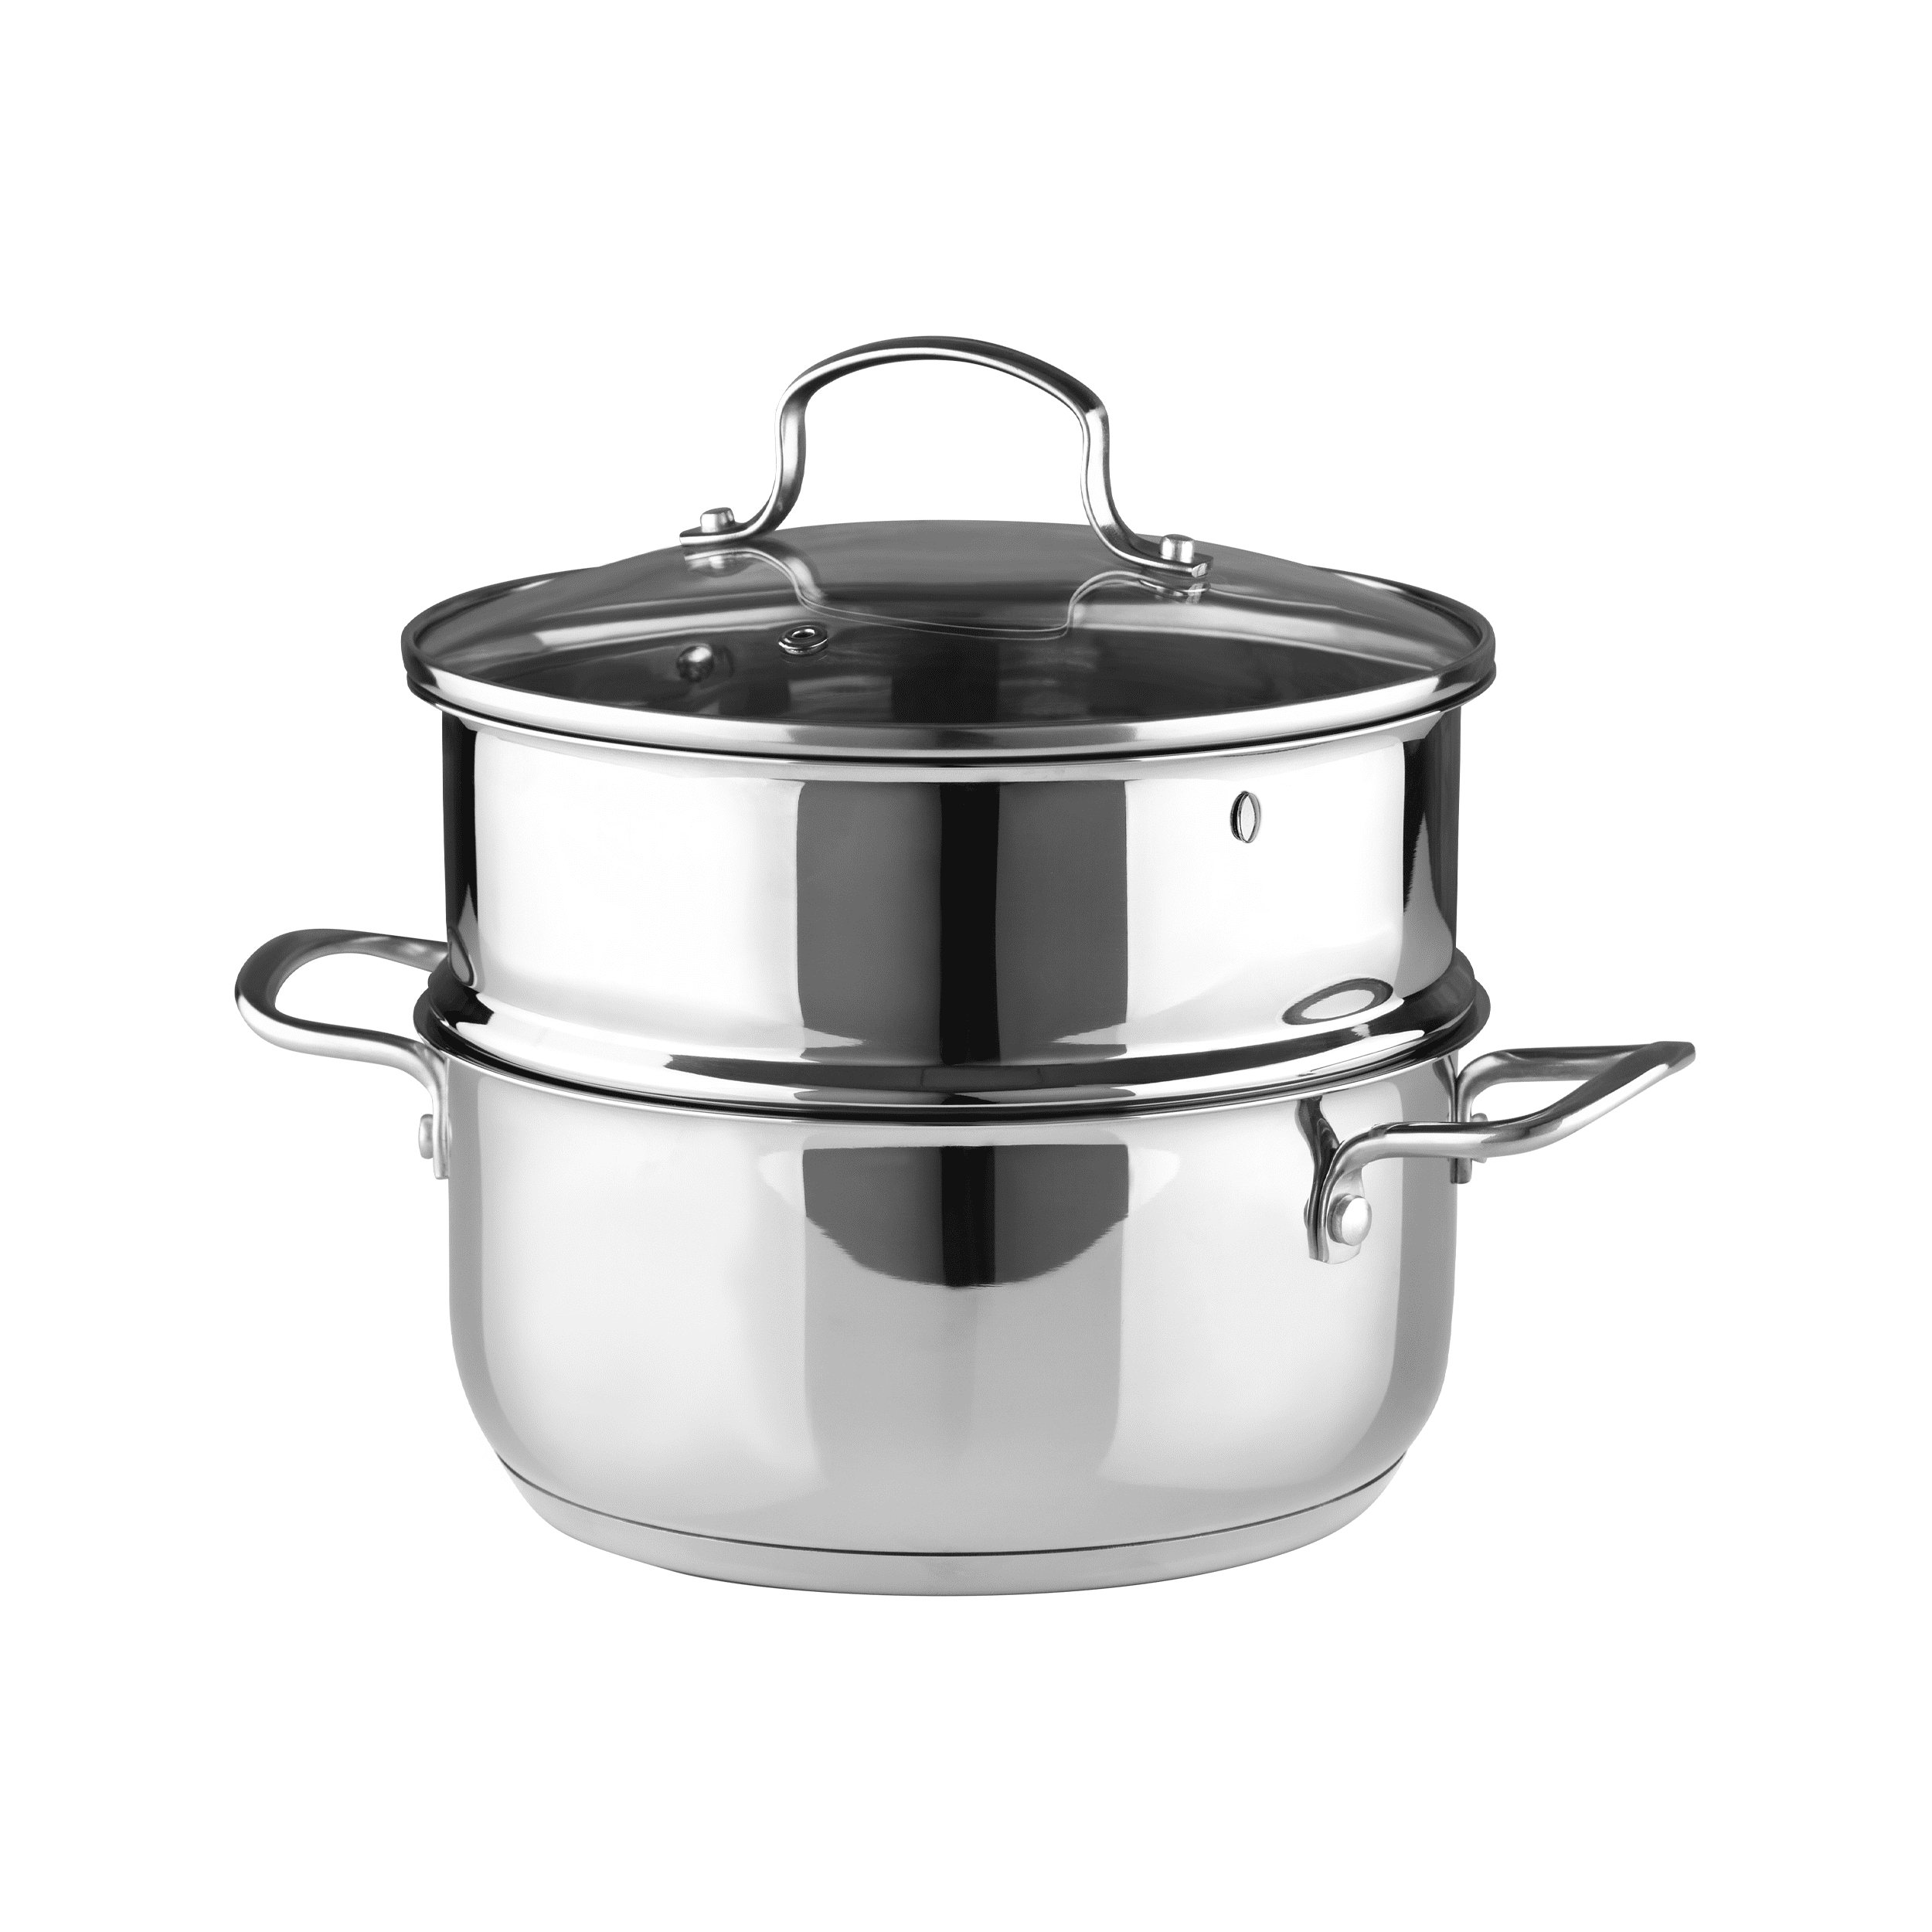 Nevlers Stainless Steel 2.8 Liter Steamer Pot with 1.9 Liter Steamer Insert  and Glass Vented Lid - Safe and Durable